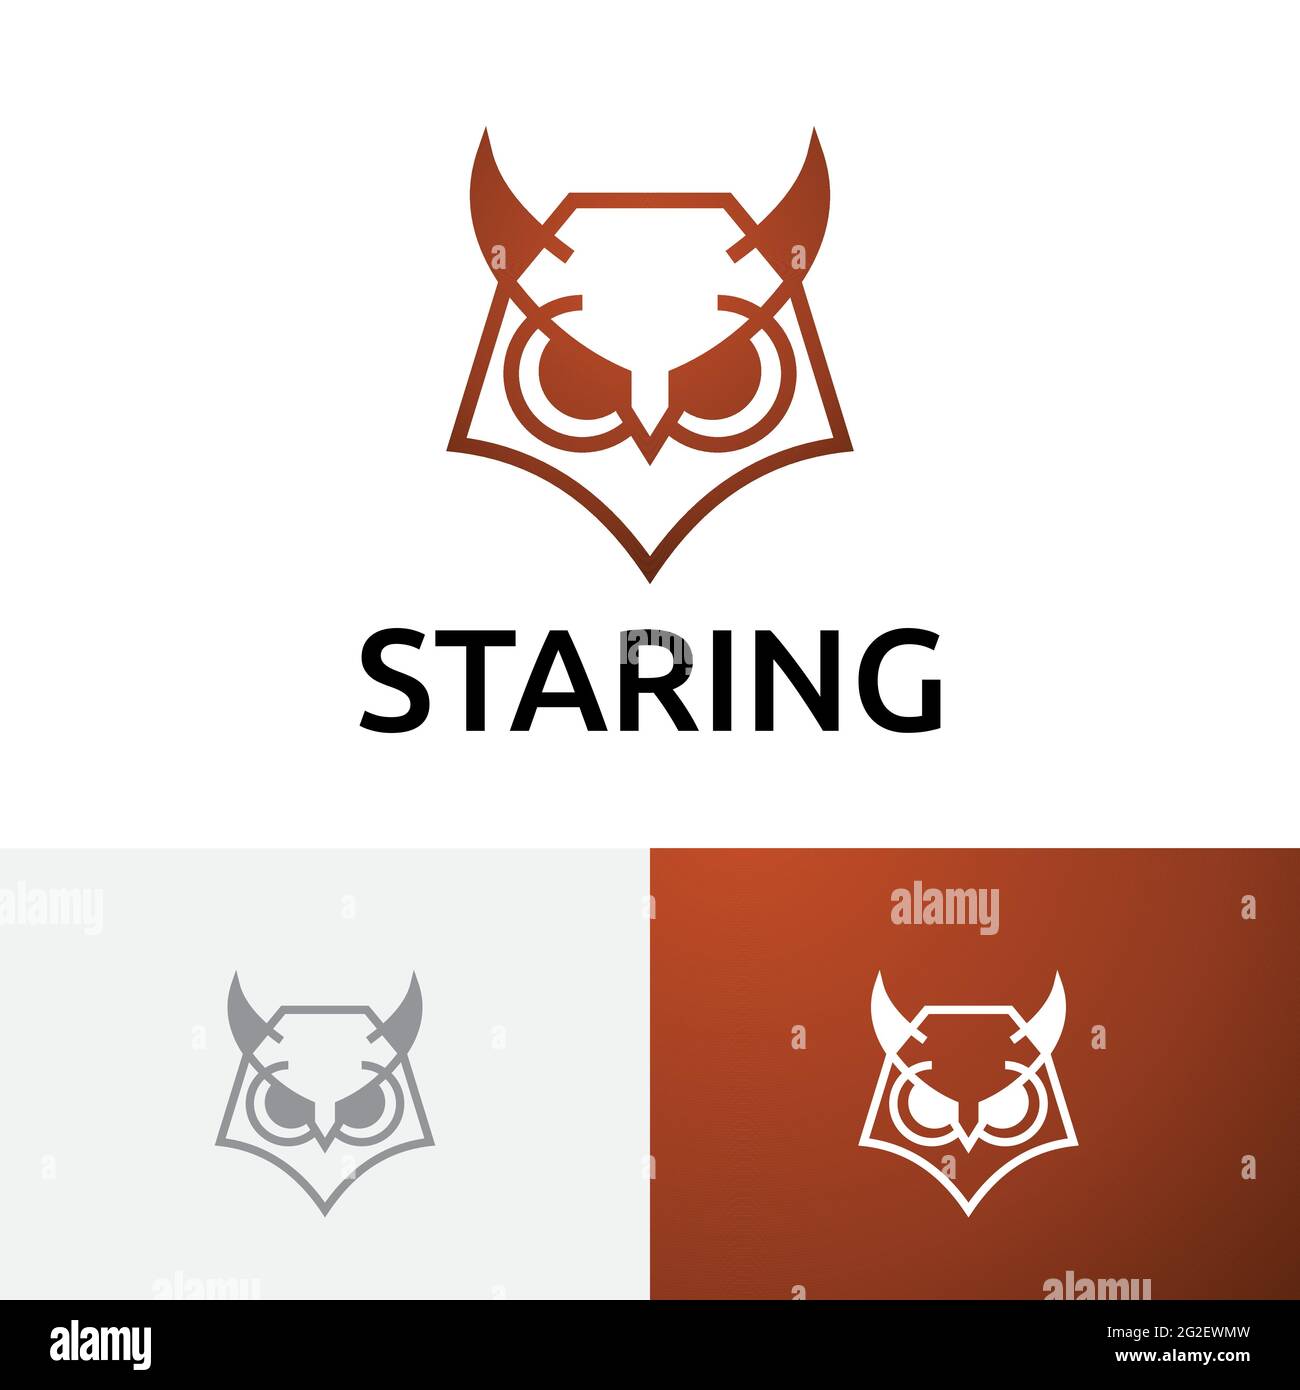 Staring Owl Eyes Focus Line Abstract Logo Stock Vector